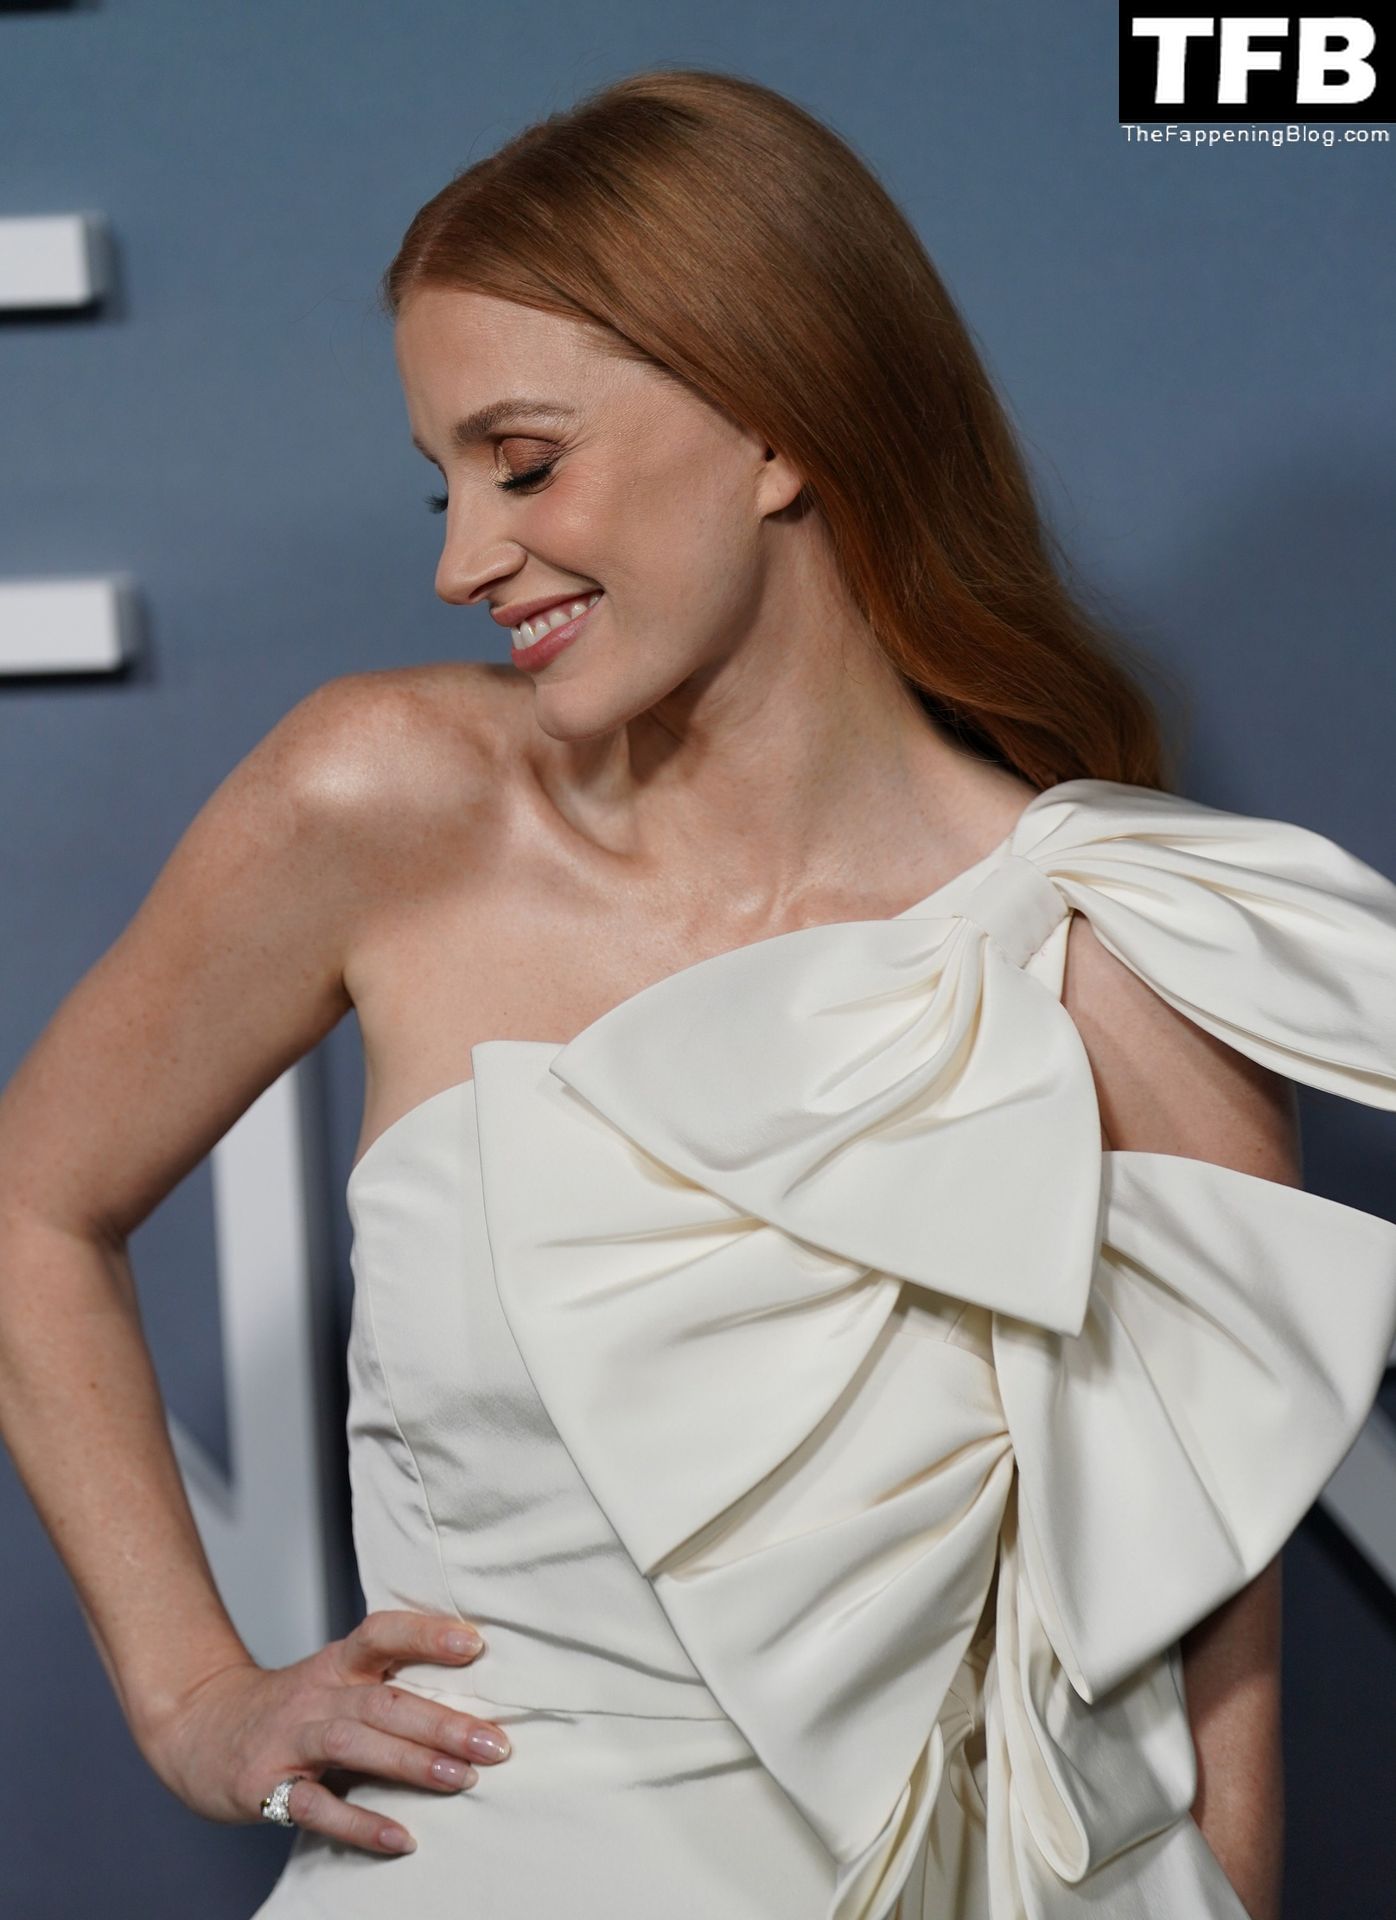 Jessica-Chastain-Sexy-The-Fappening-Blog-118-1.jpg